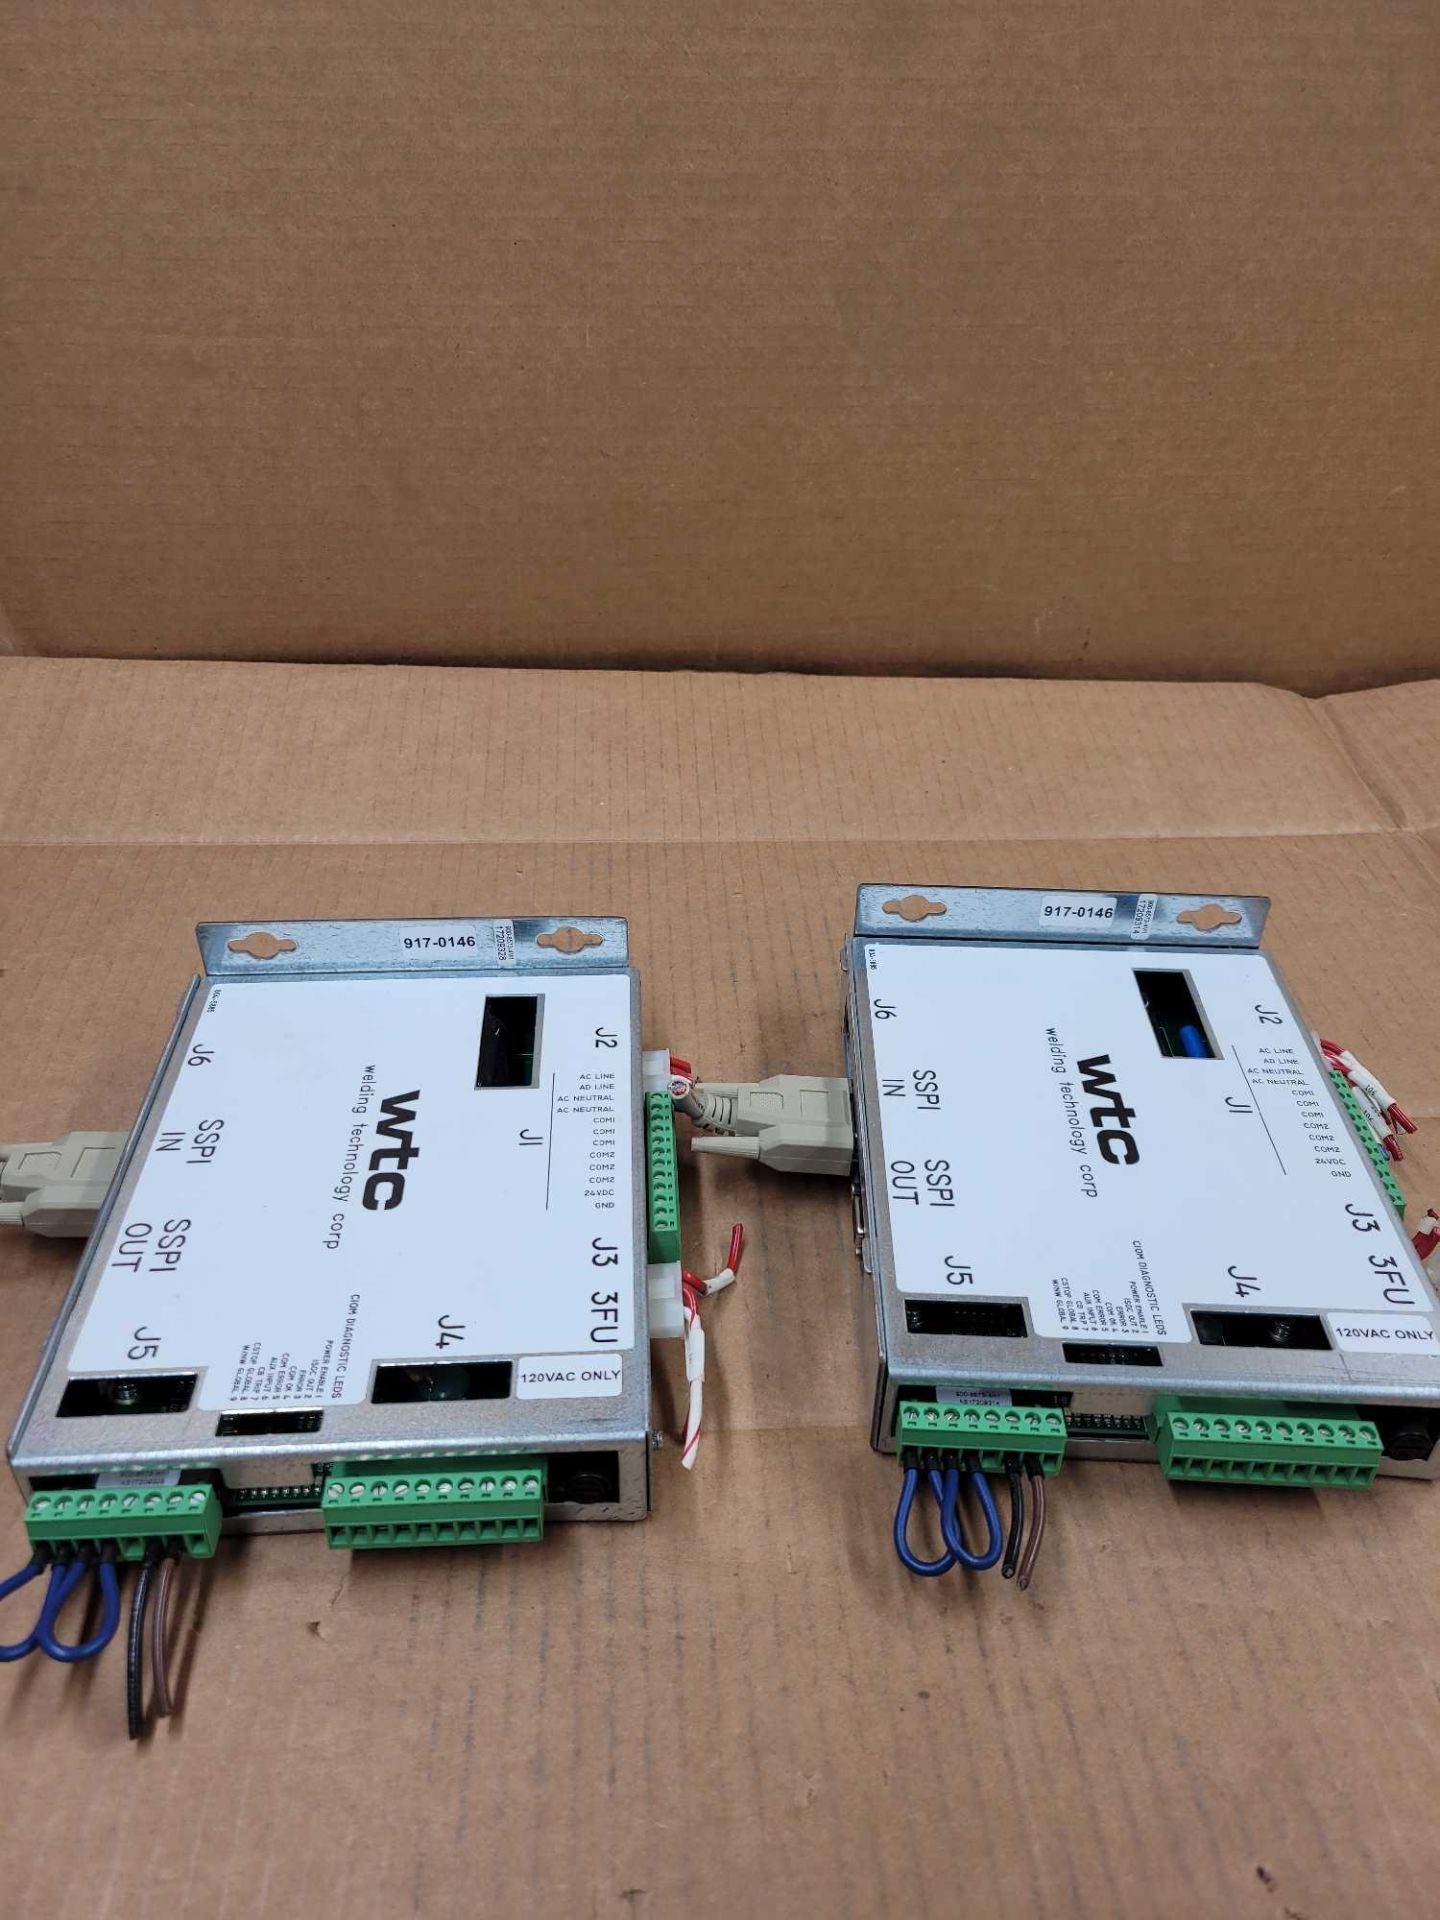 LOT OF 2 WTC 917-0146 / 900-8573-4M1 Timing Module  /  Lot Weight: 5.2 lbs